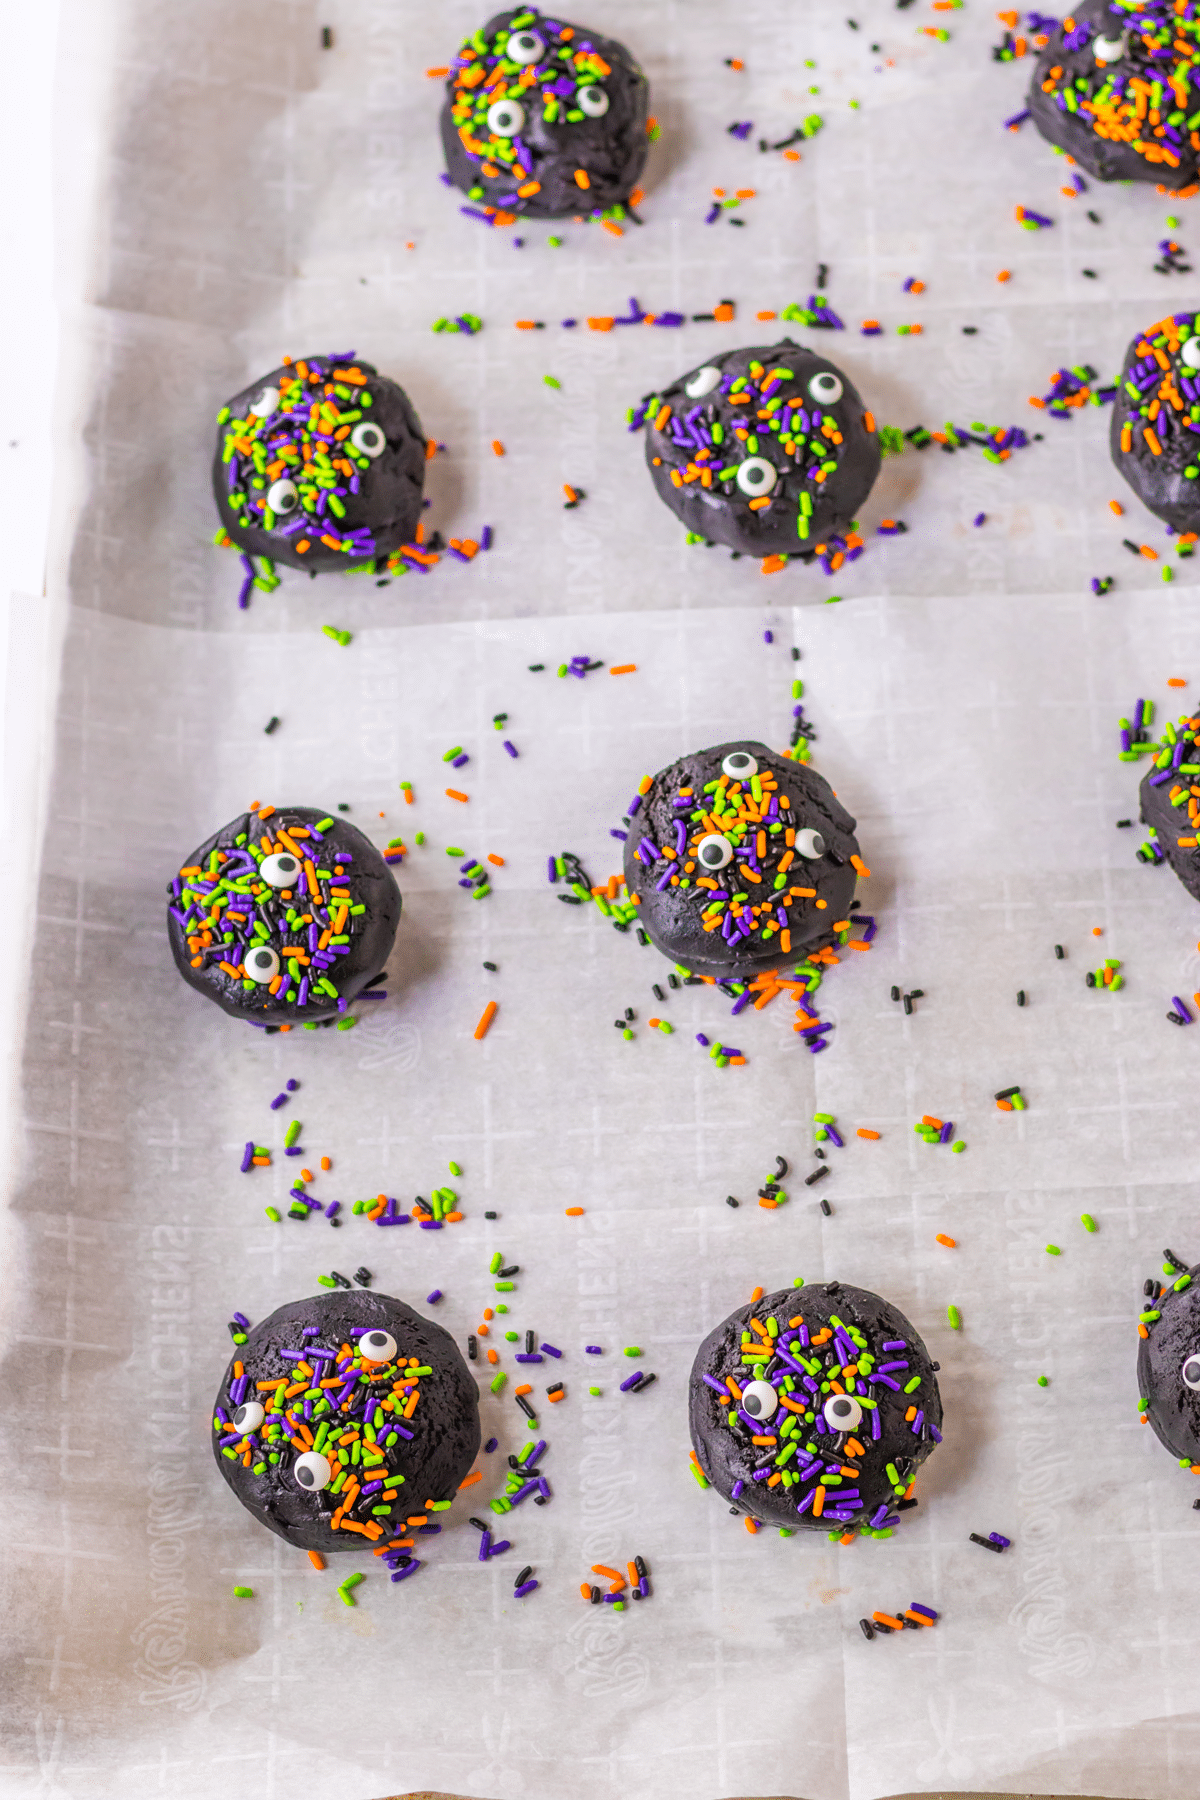 Another process in making Halloween Black Velvet Cookies is to chill the balls and add sprinkles into them.